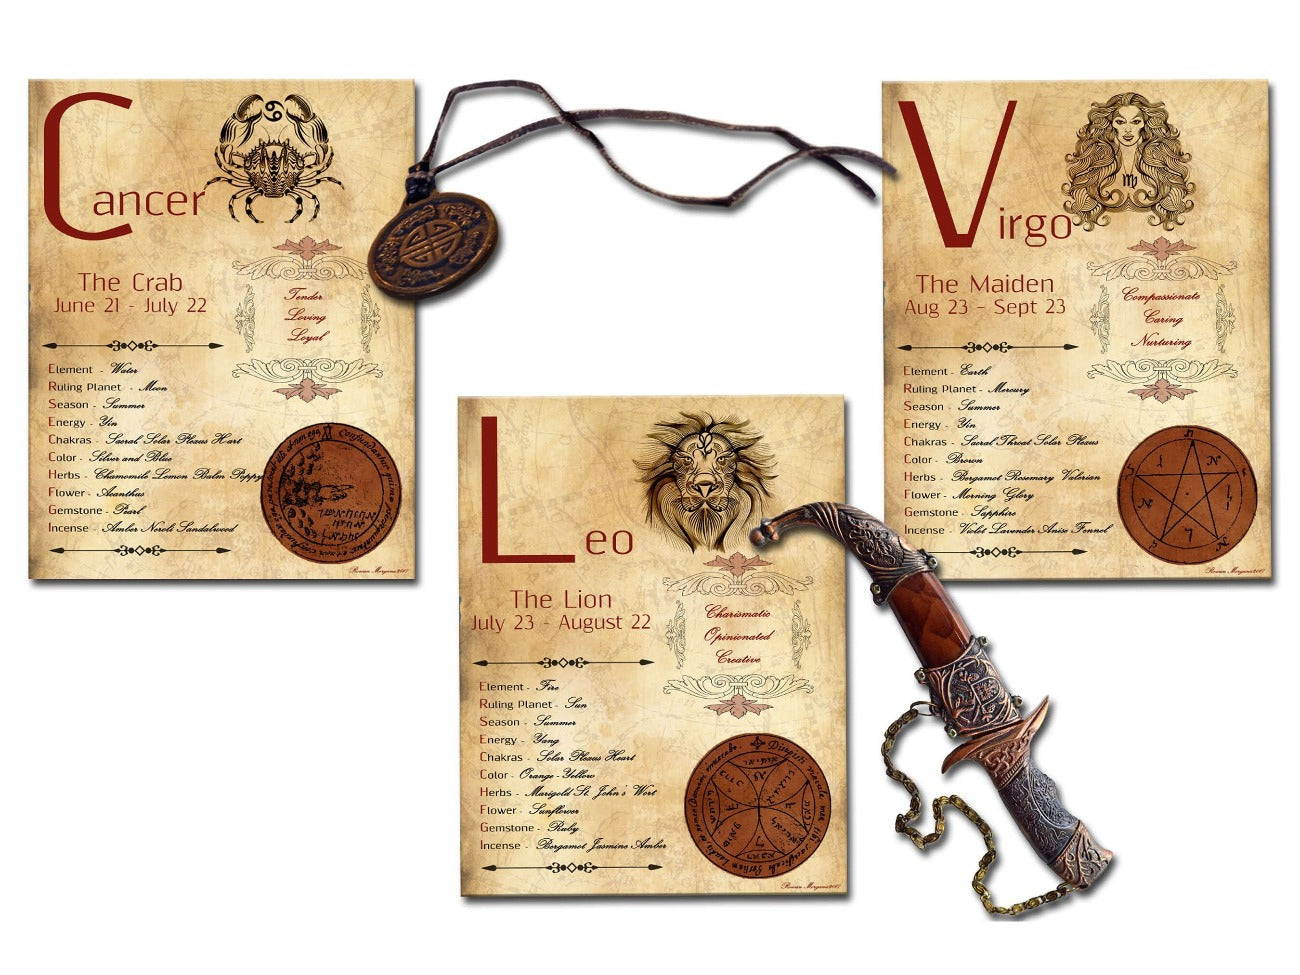 Cancer, Leo, and Virgo pages show the Red Titles and zodiac imagery for each page.